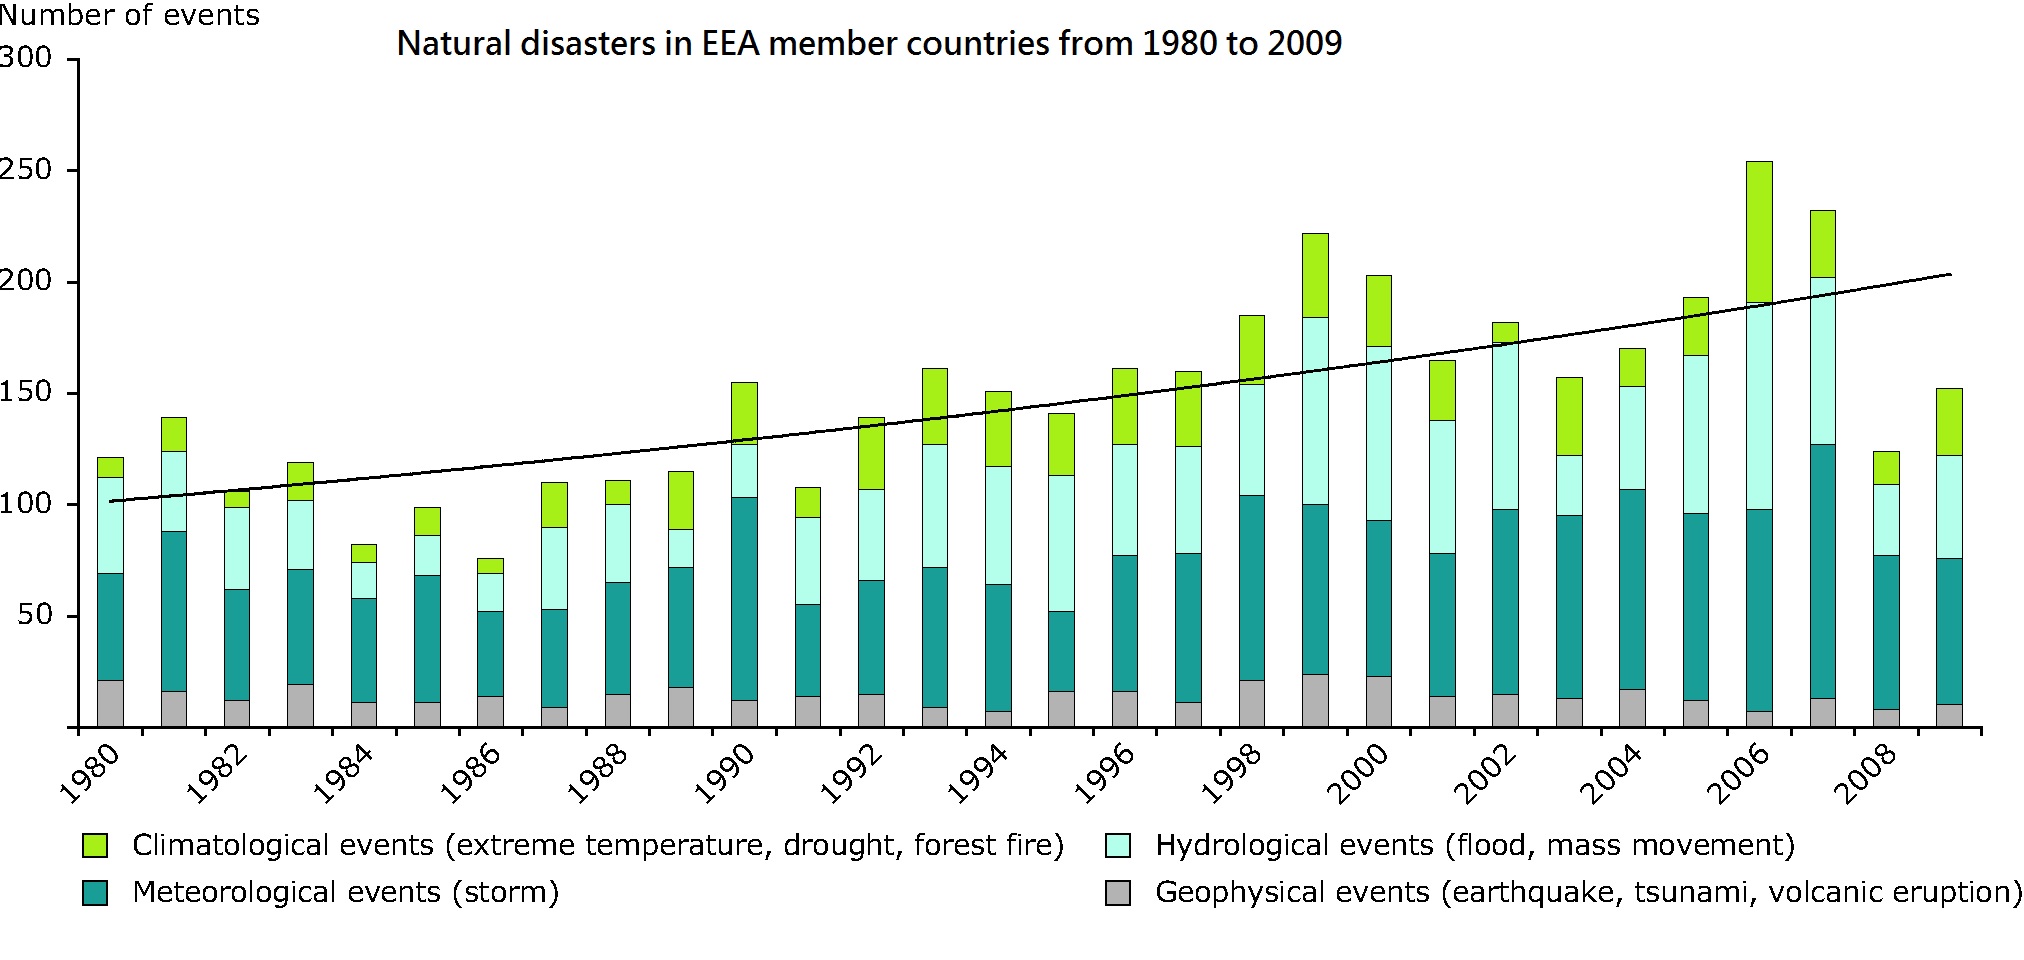 natural disasters in European Economic Area member countries 1980 to 2009